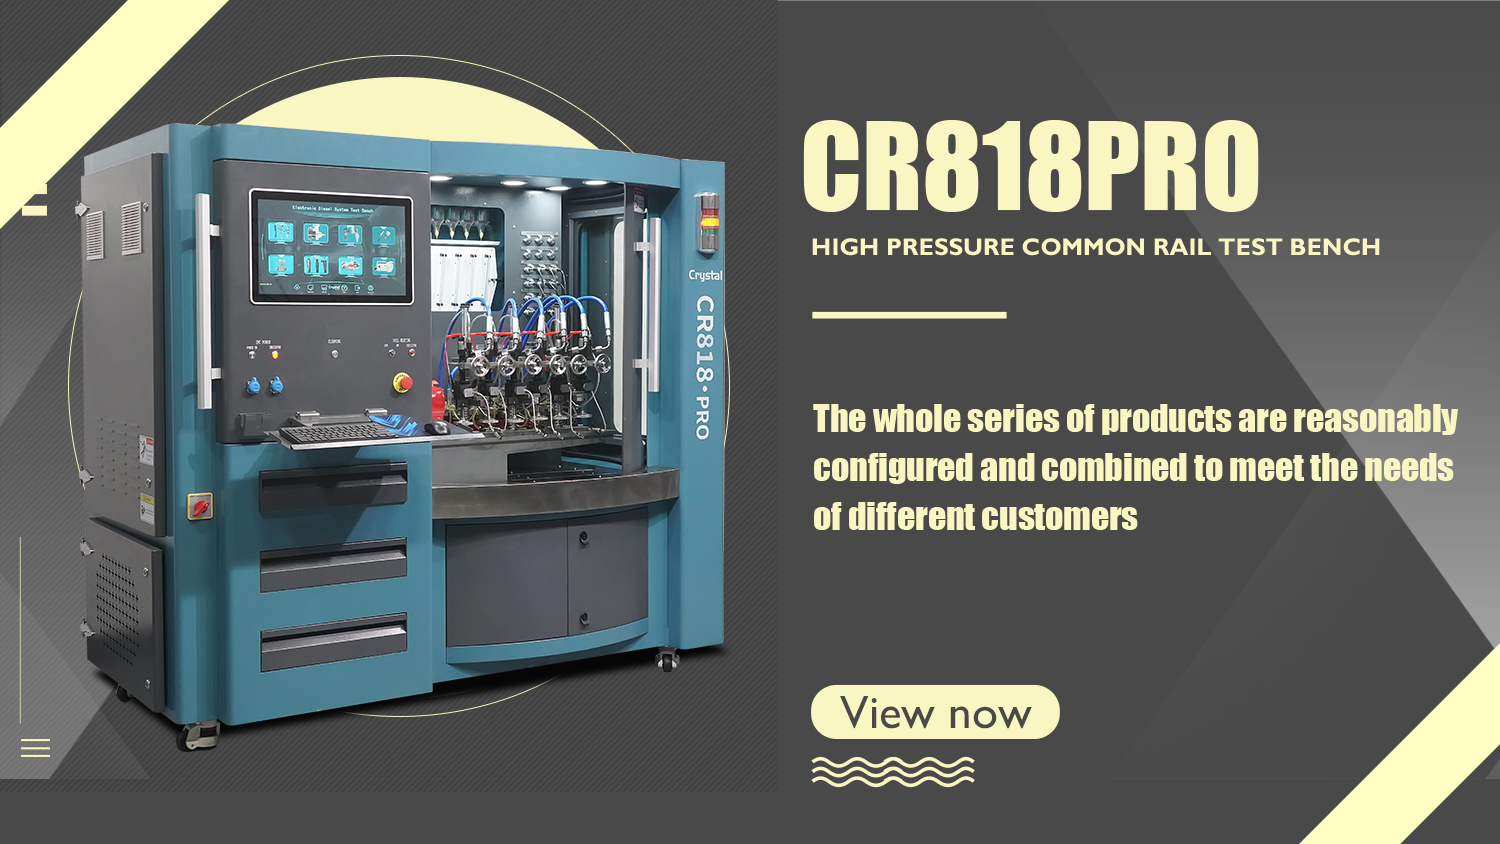 Crystal is a trusted brand of common rail test bench